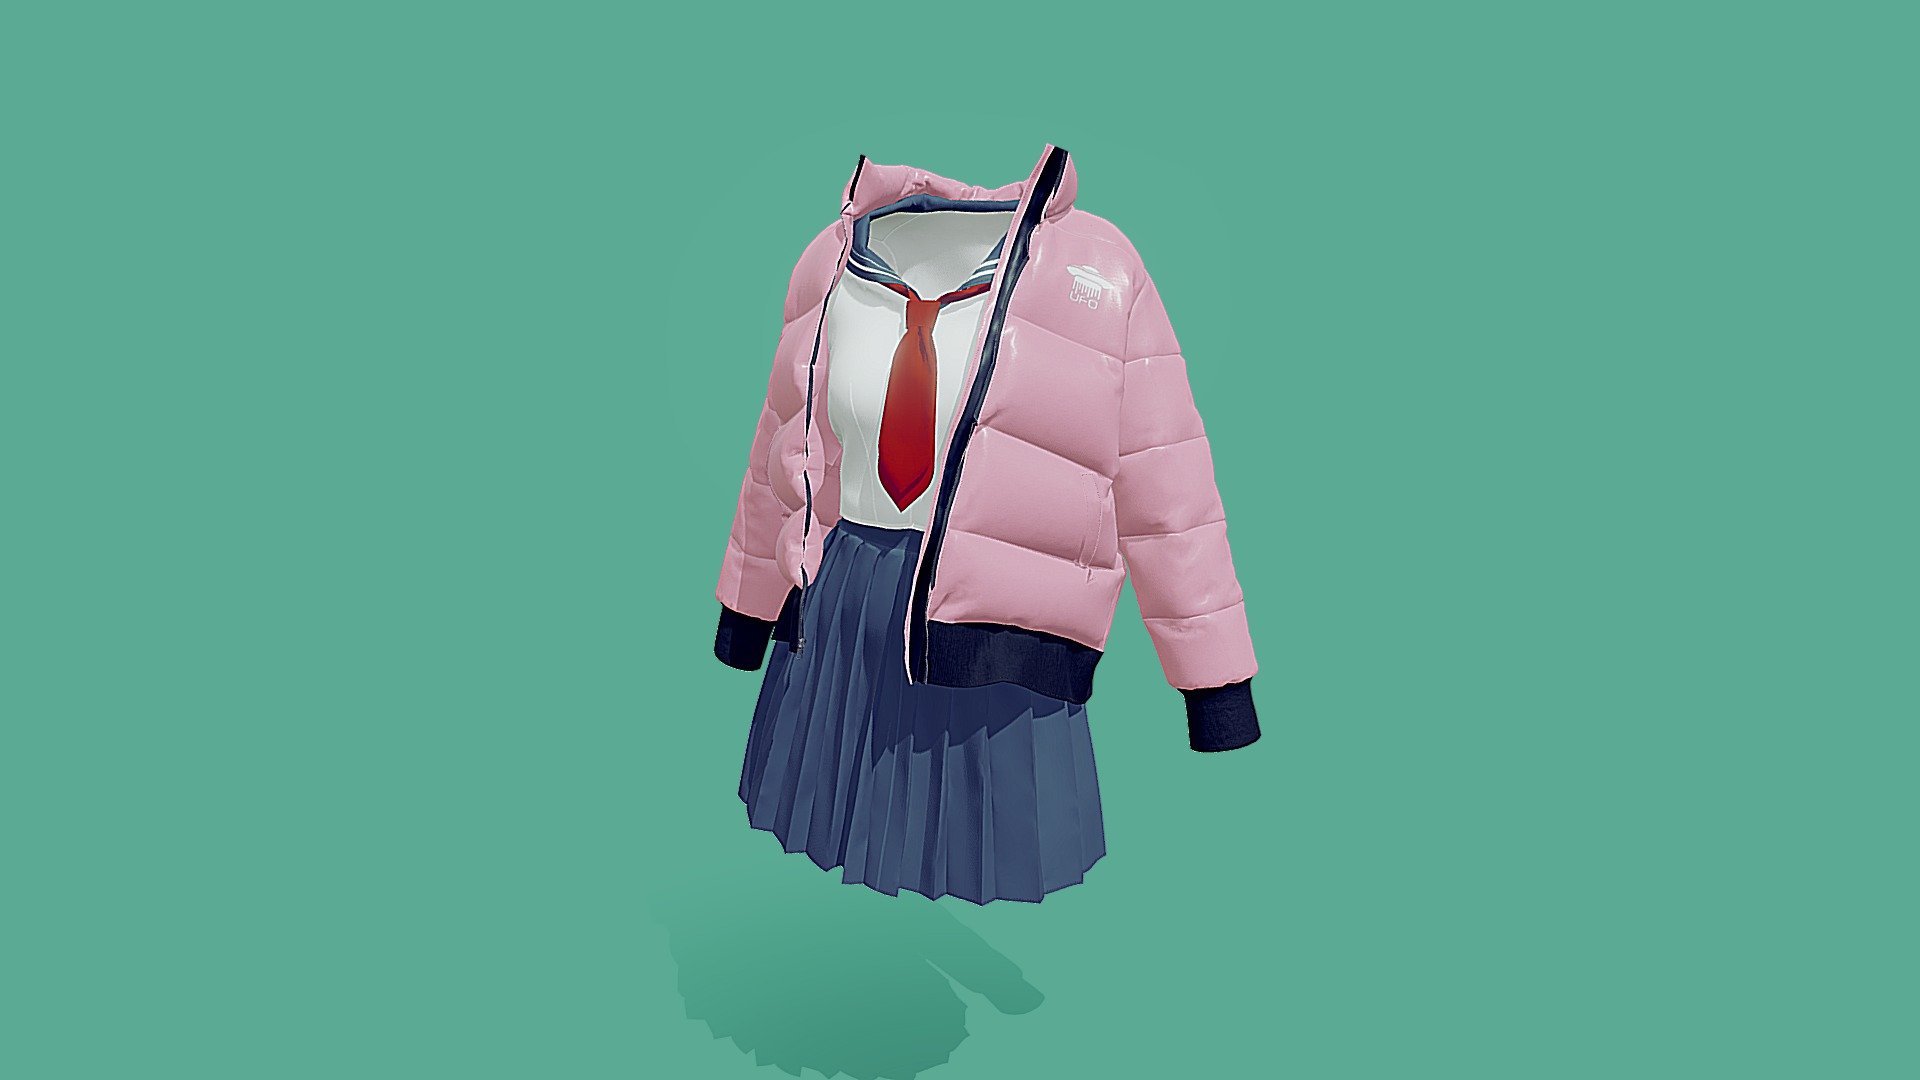 My latest experiment using Marvelous Designer. This one is to learn how to handle pleats and the inflated effect. Hope you like it! - Japanese Sailor Uniform + Puffer Jacket - 3D model by Akiko.Tomiyoshi 3d model